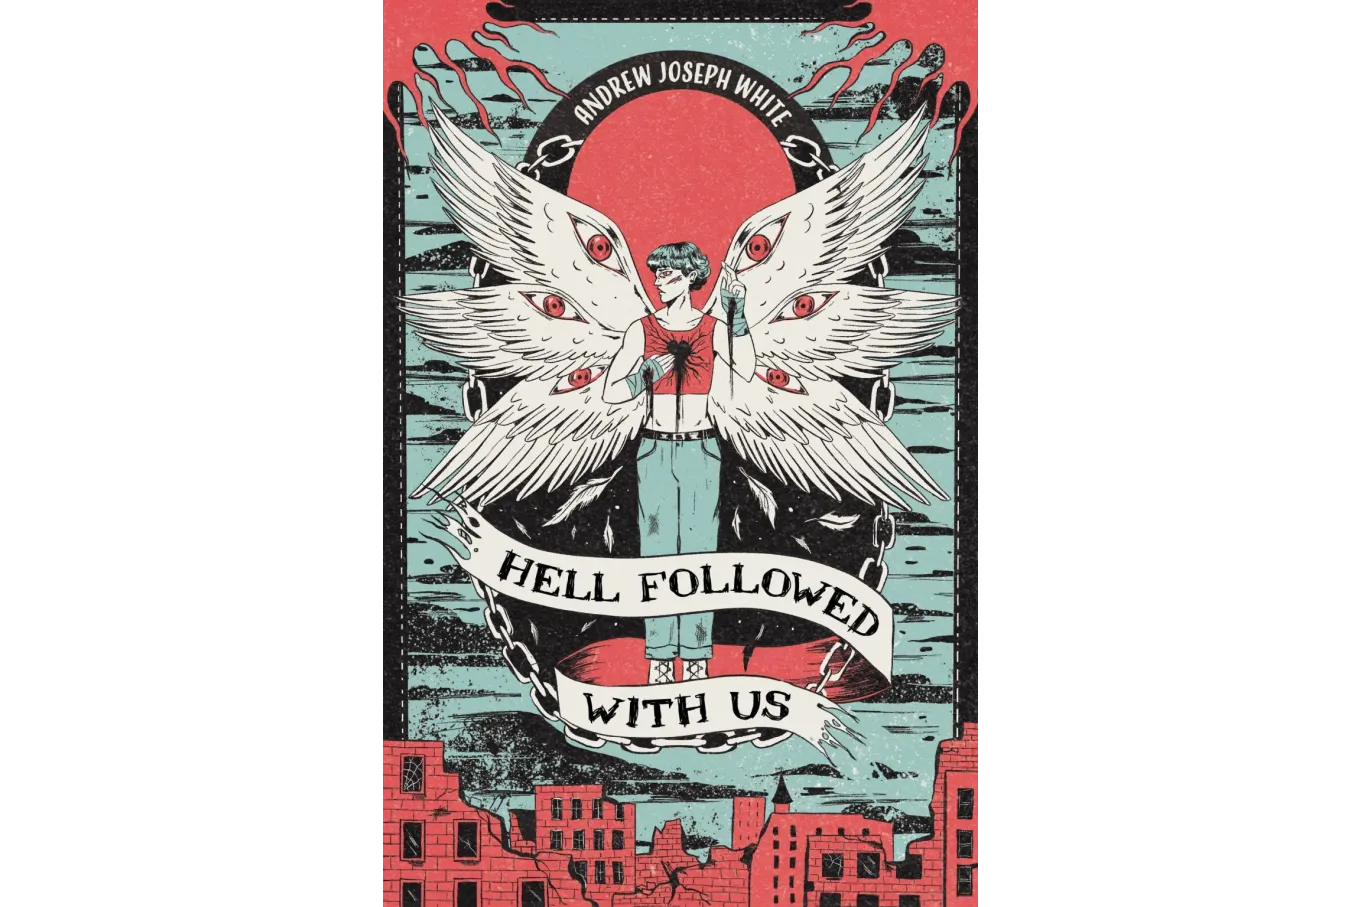 cover of the book hell followed with us